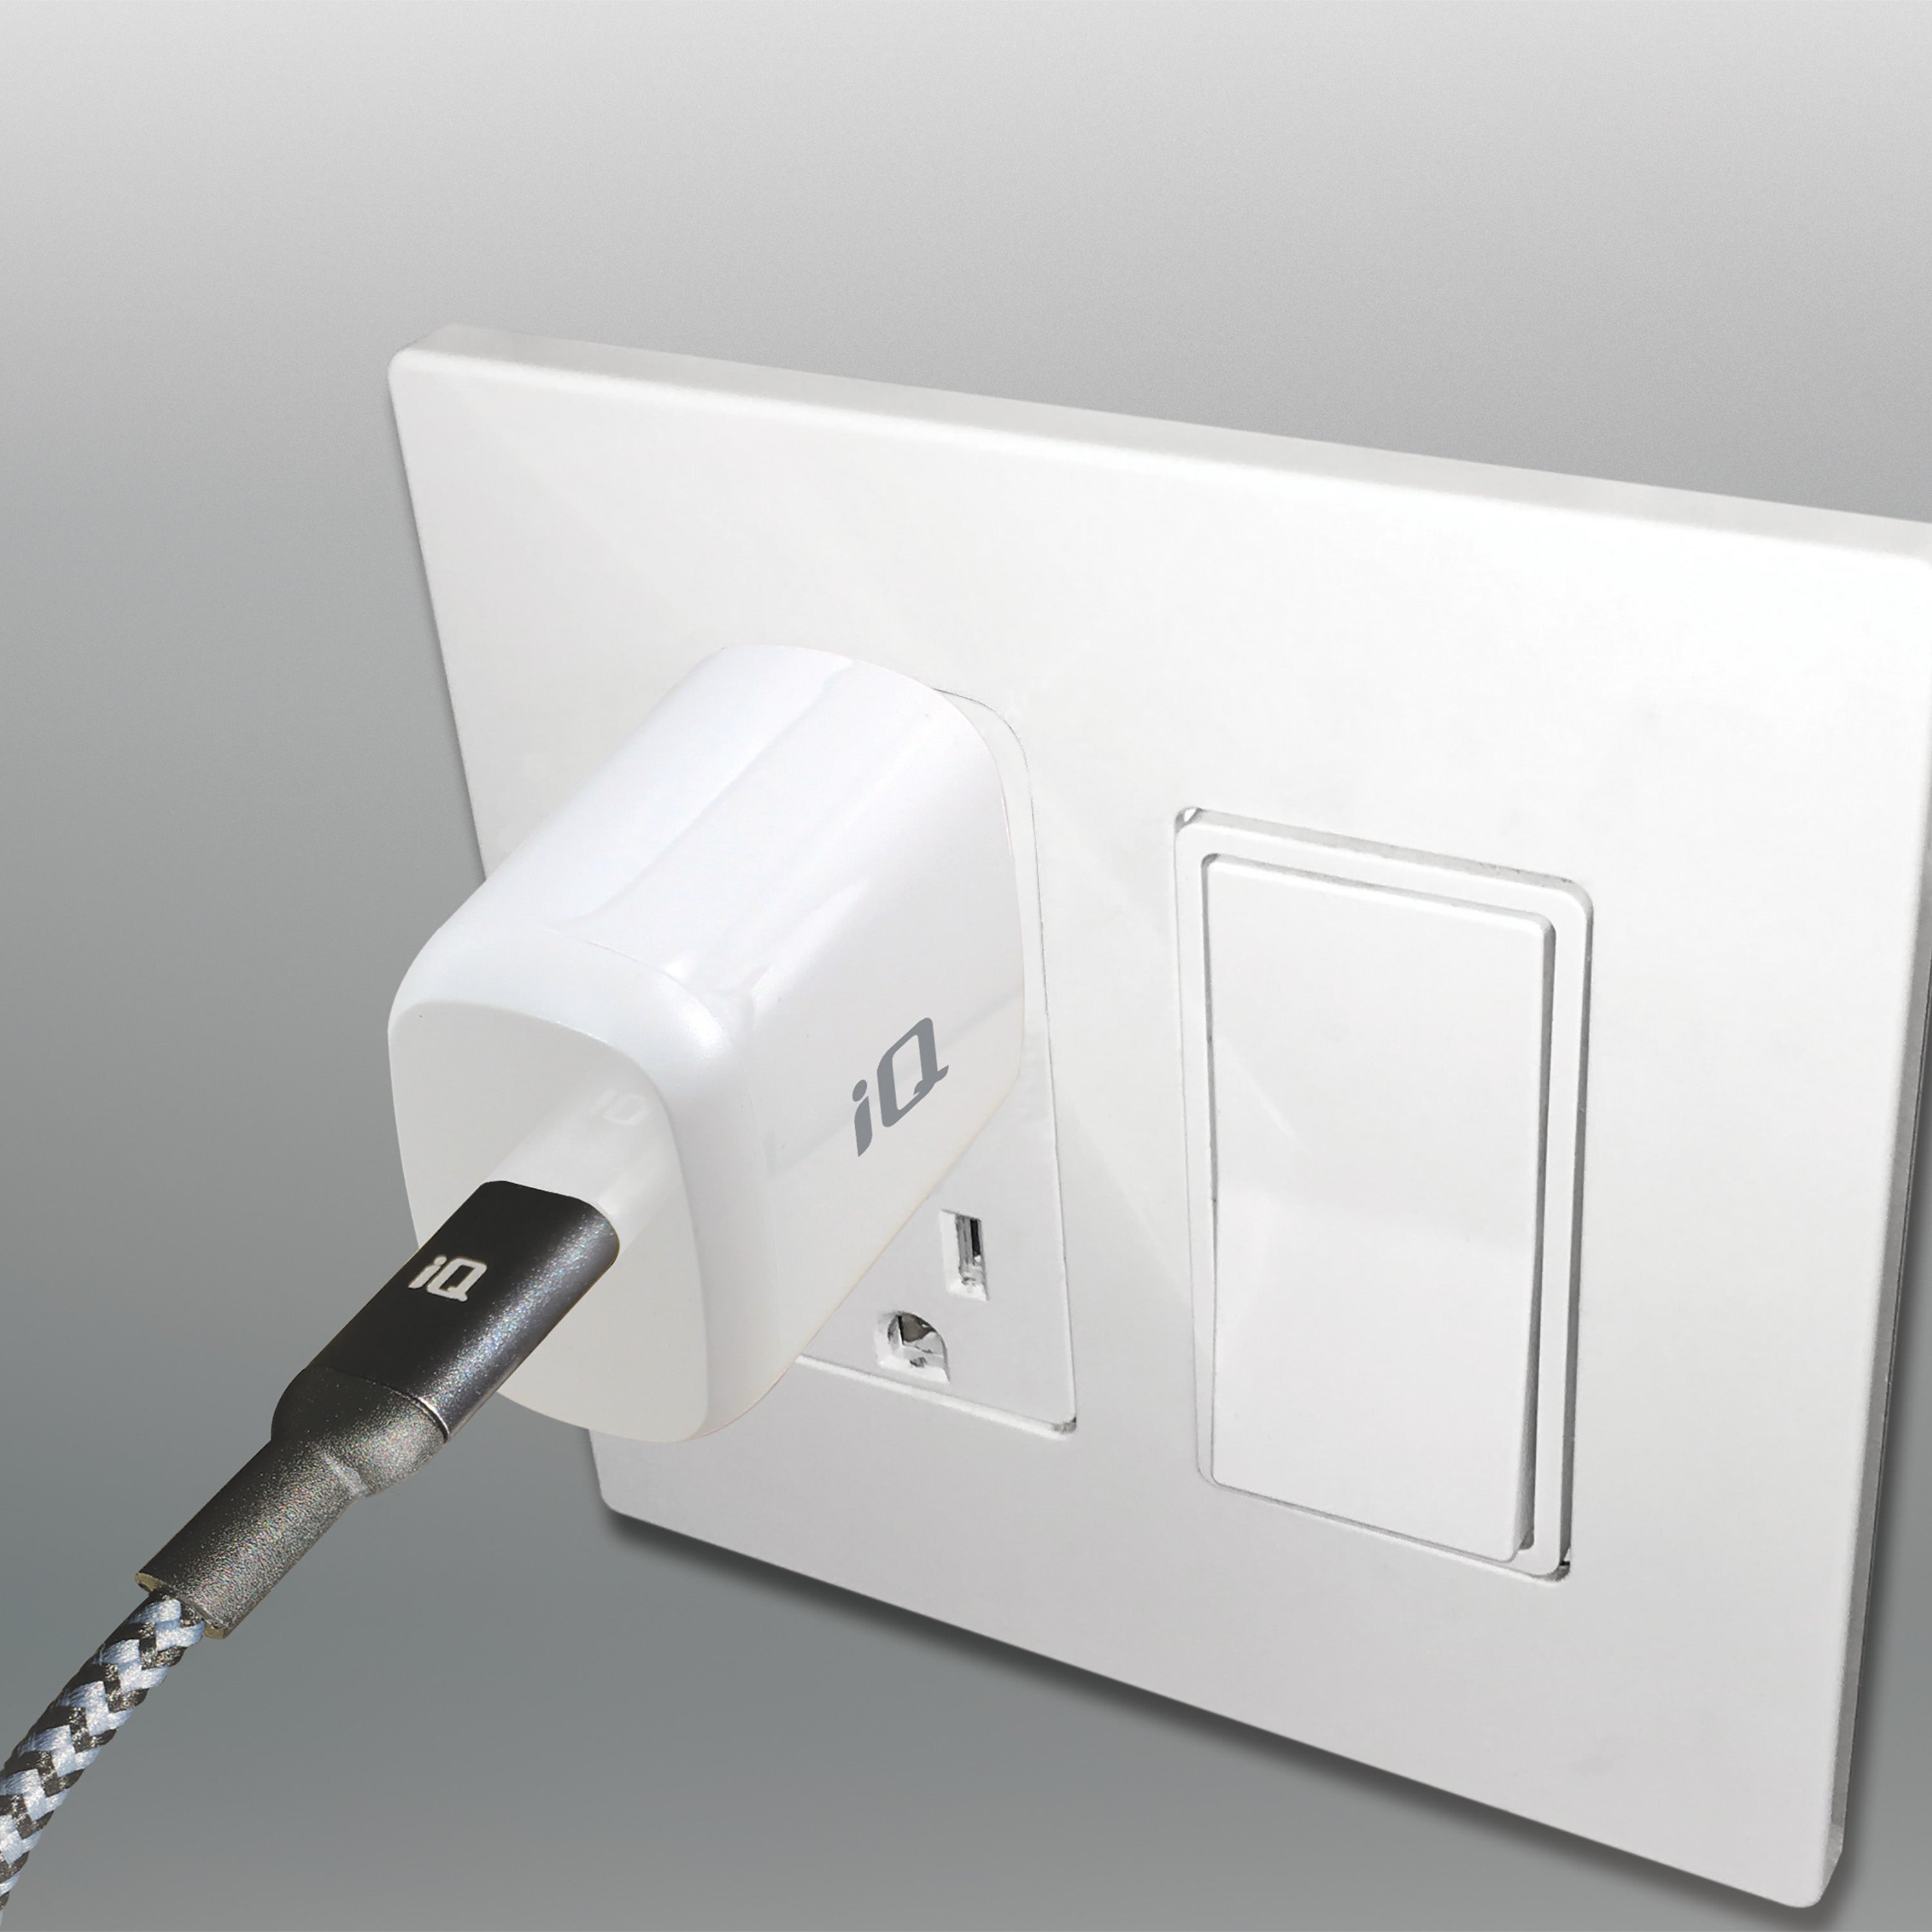 iQ USB PD 20W Wall Charger - White